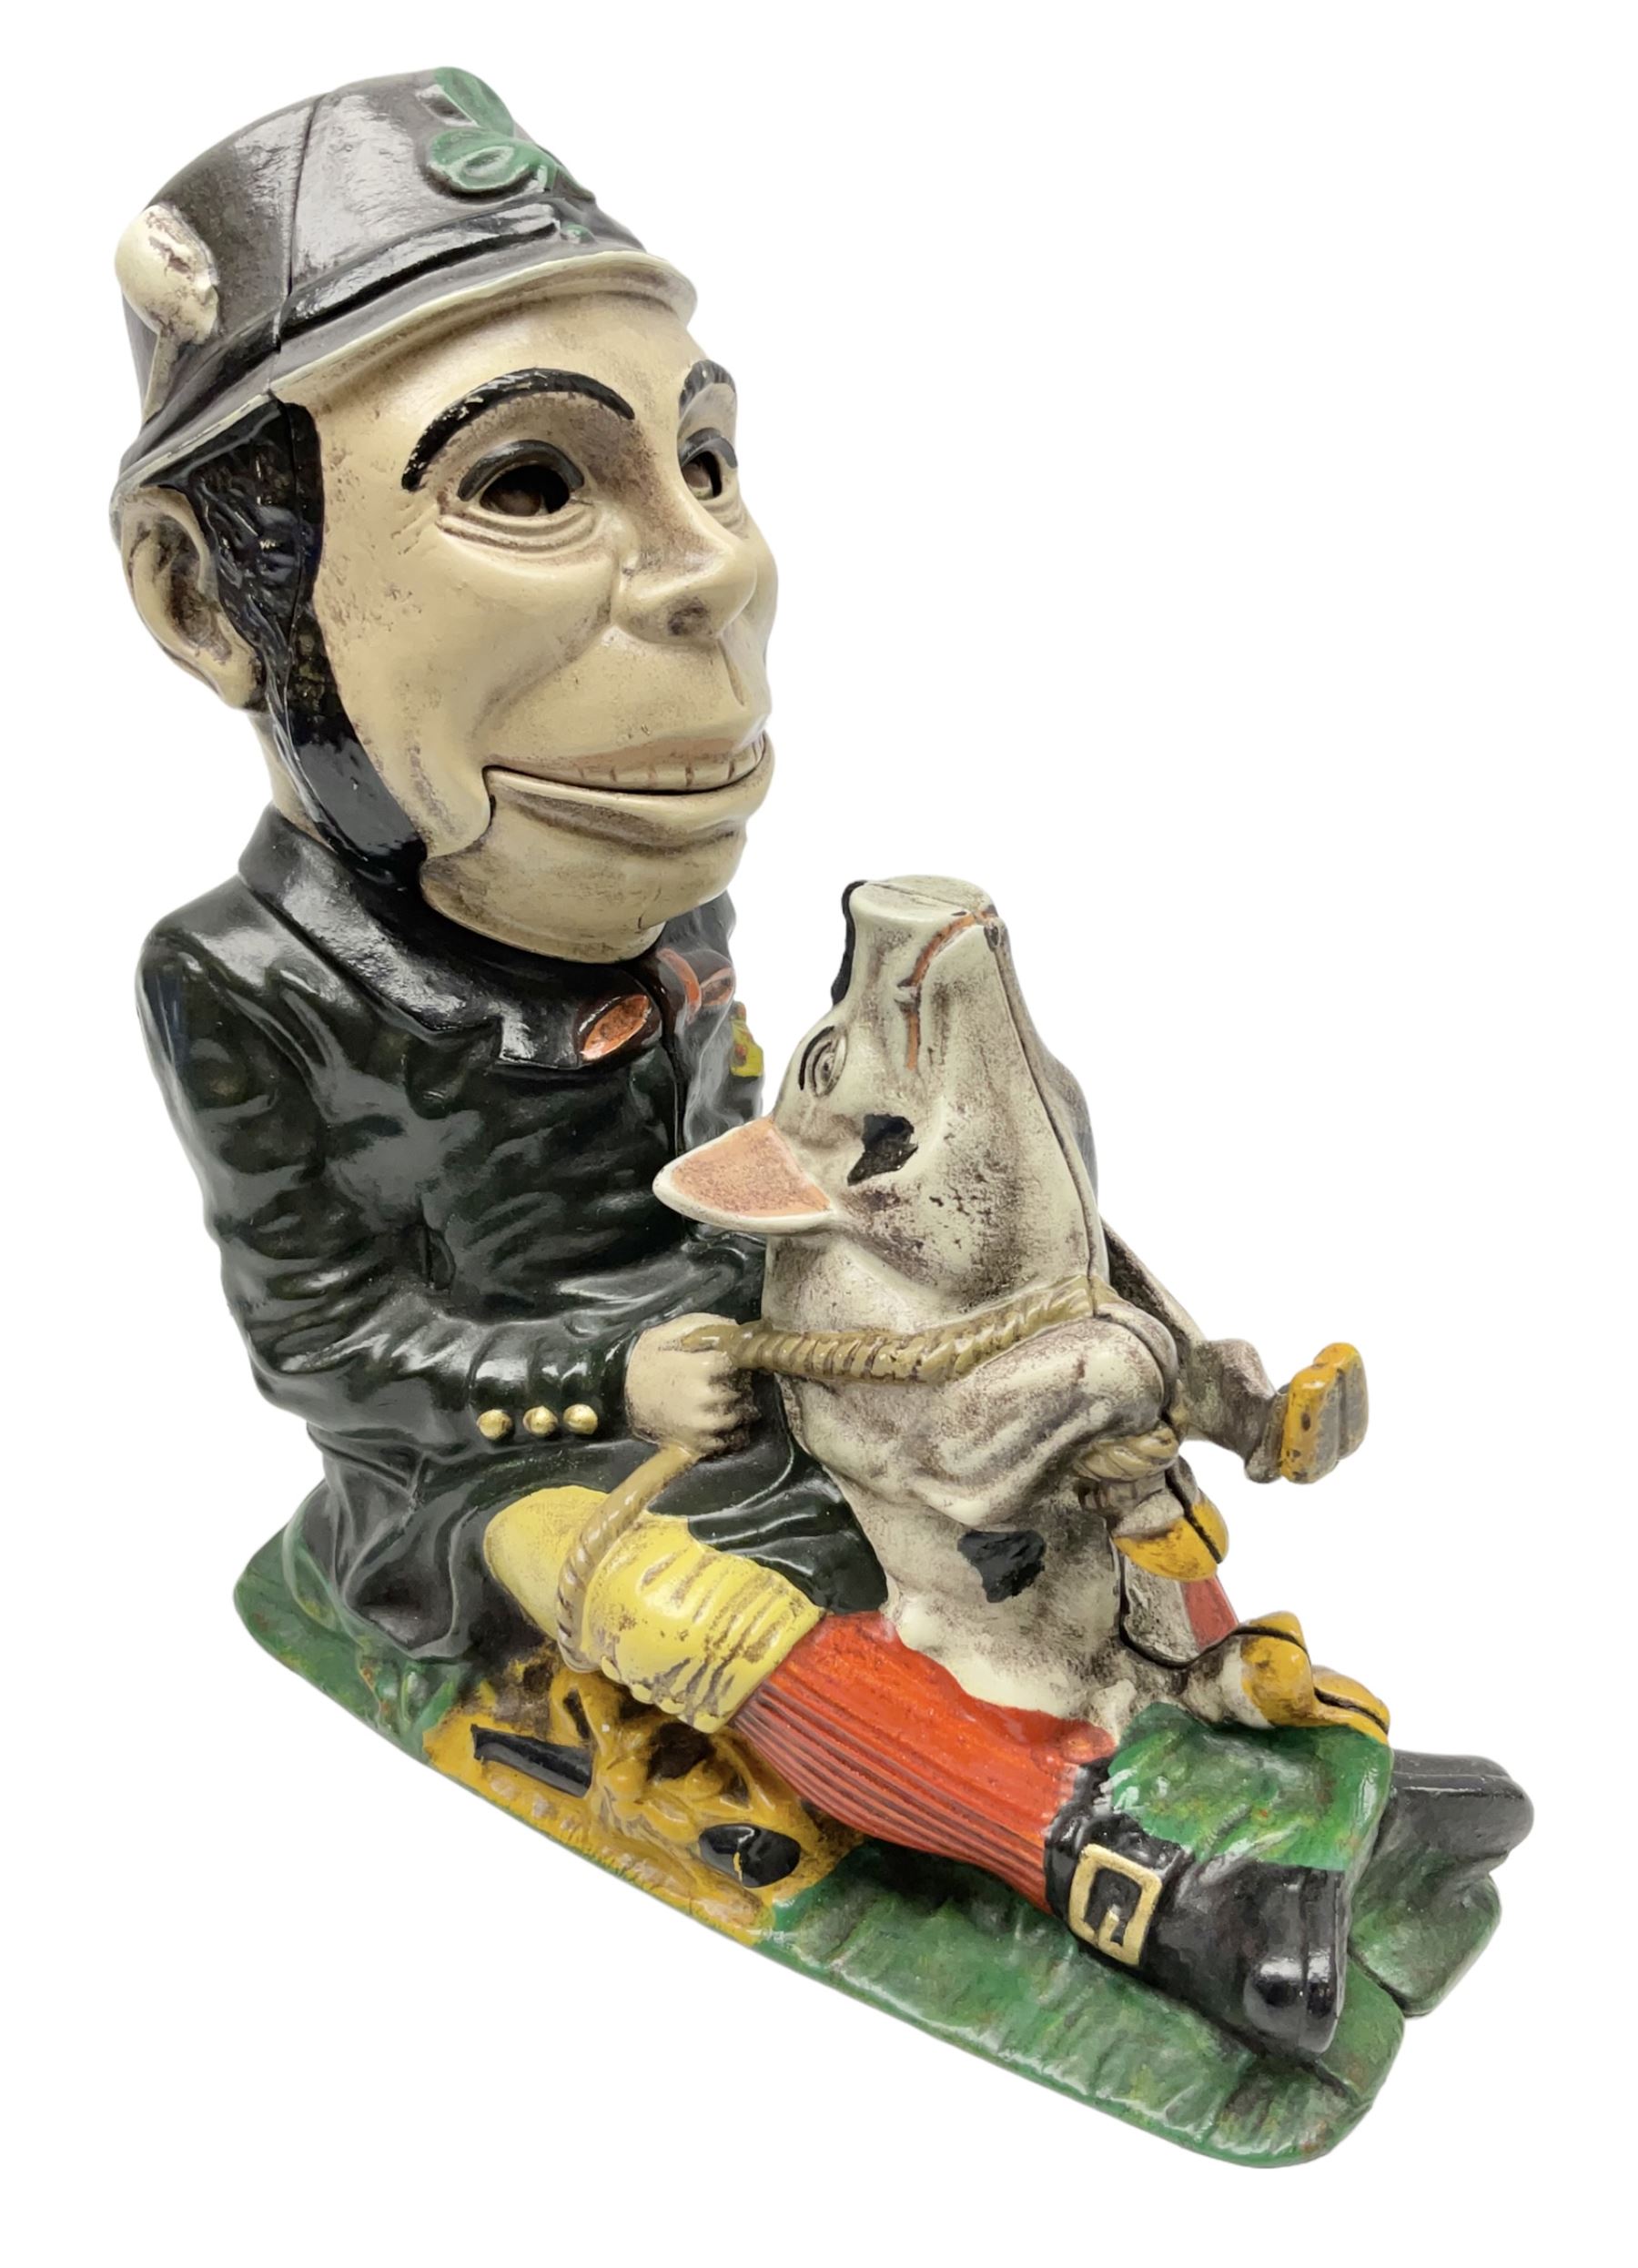 Late 19th century cast-iron mechanical money bank 'Paddy and the Pig' by J & E Stevens; patented 8th